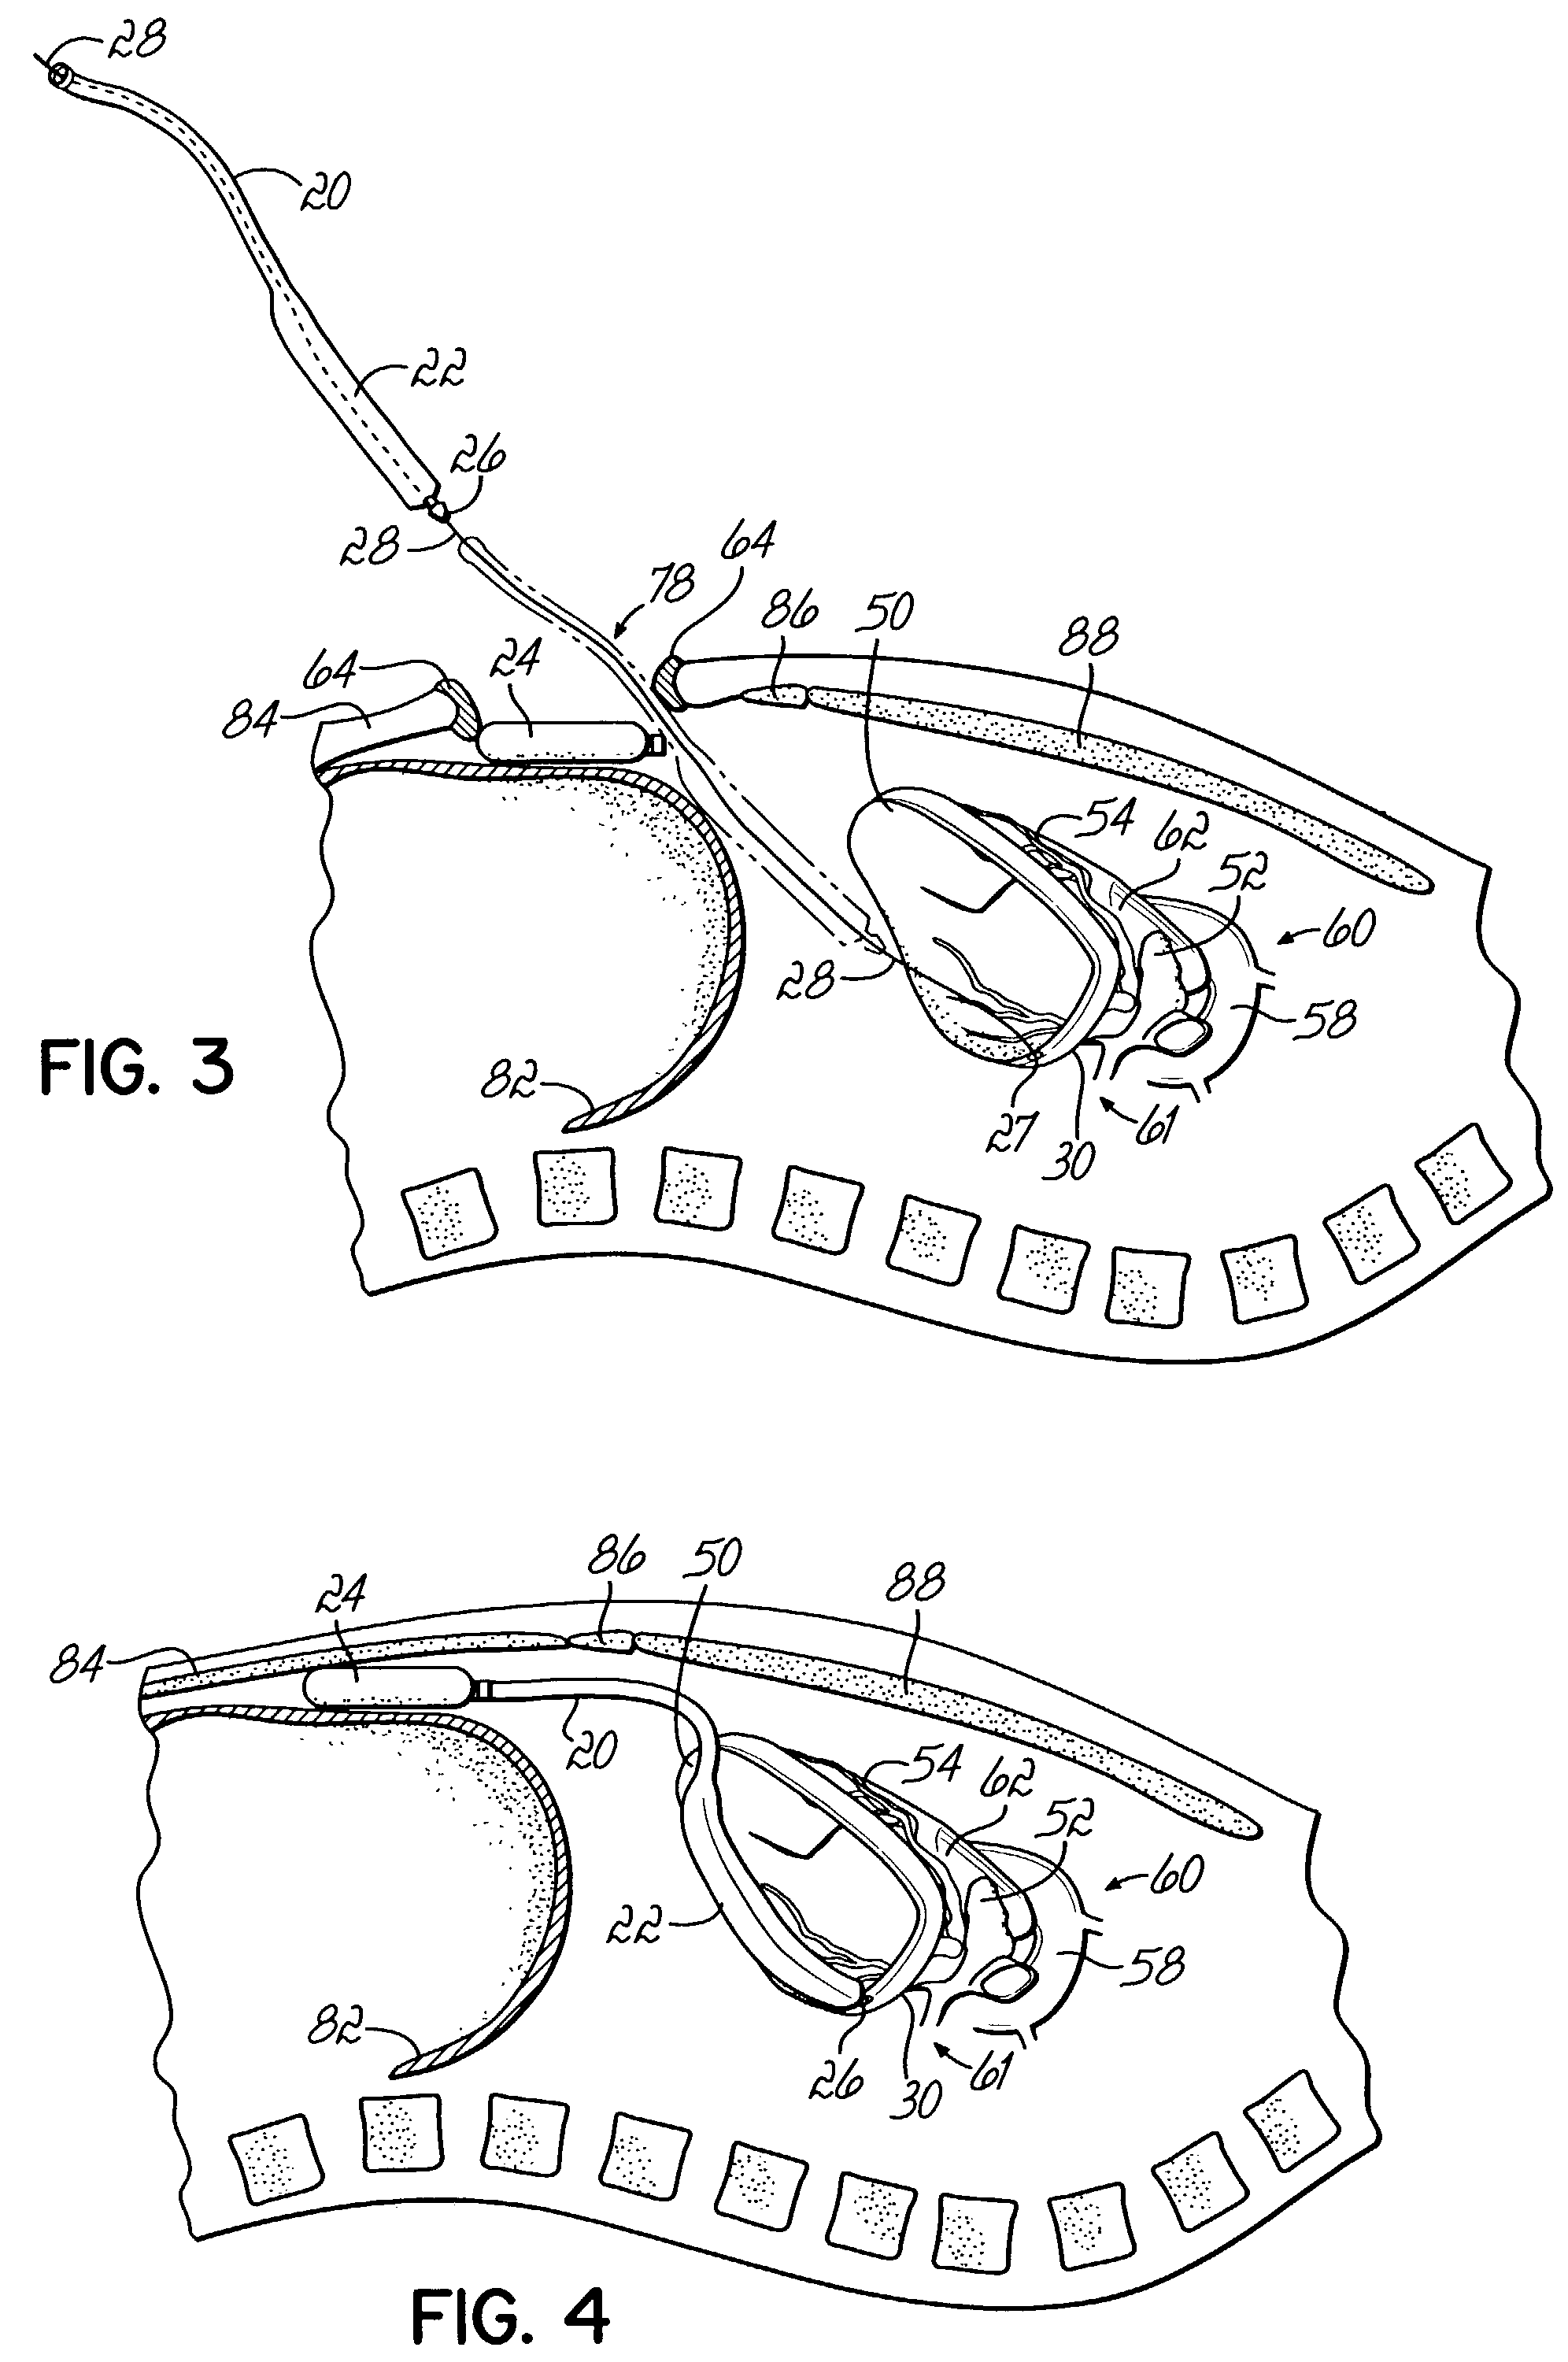 Modular power system and method for a heart wall actuation system for the natural heart